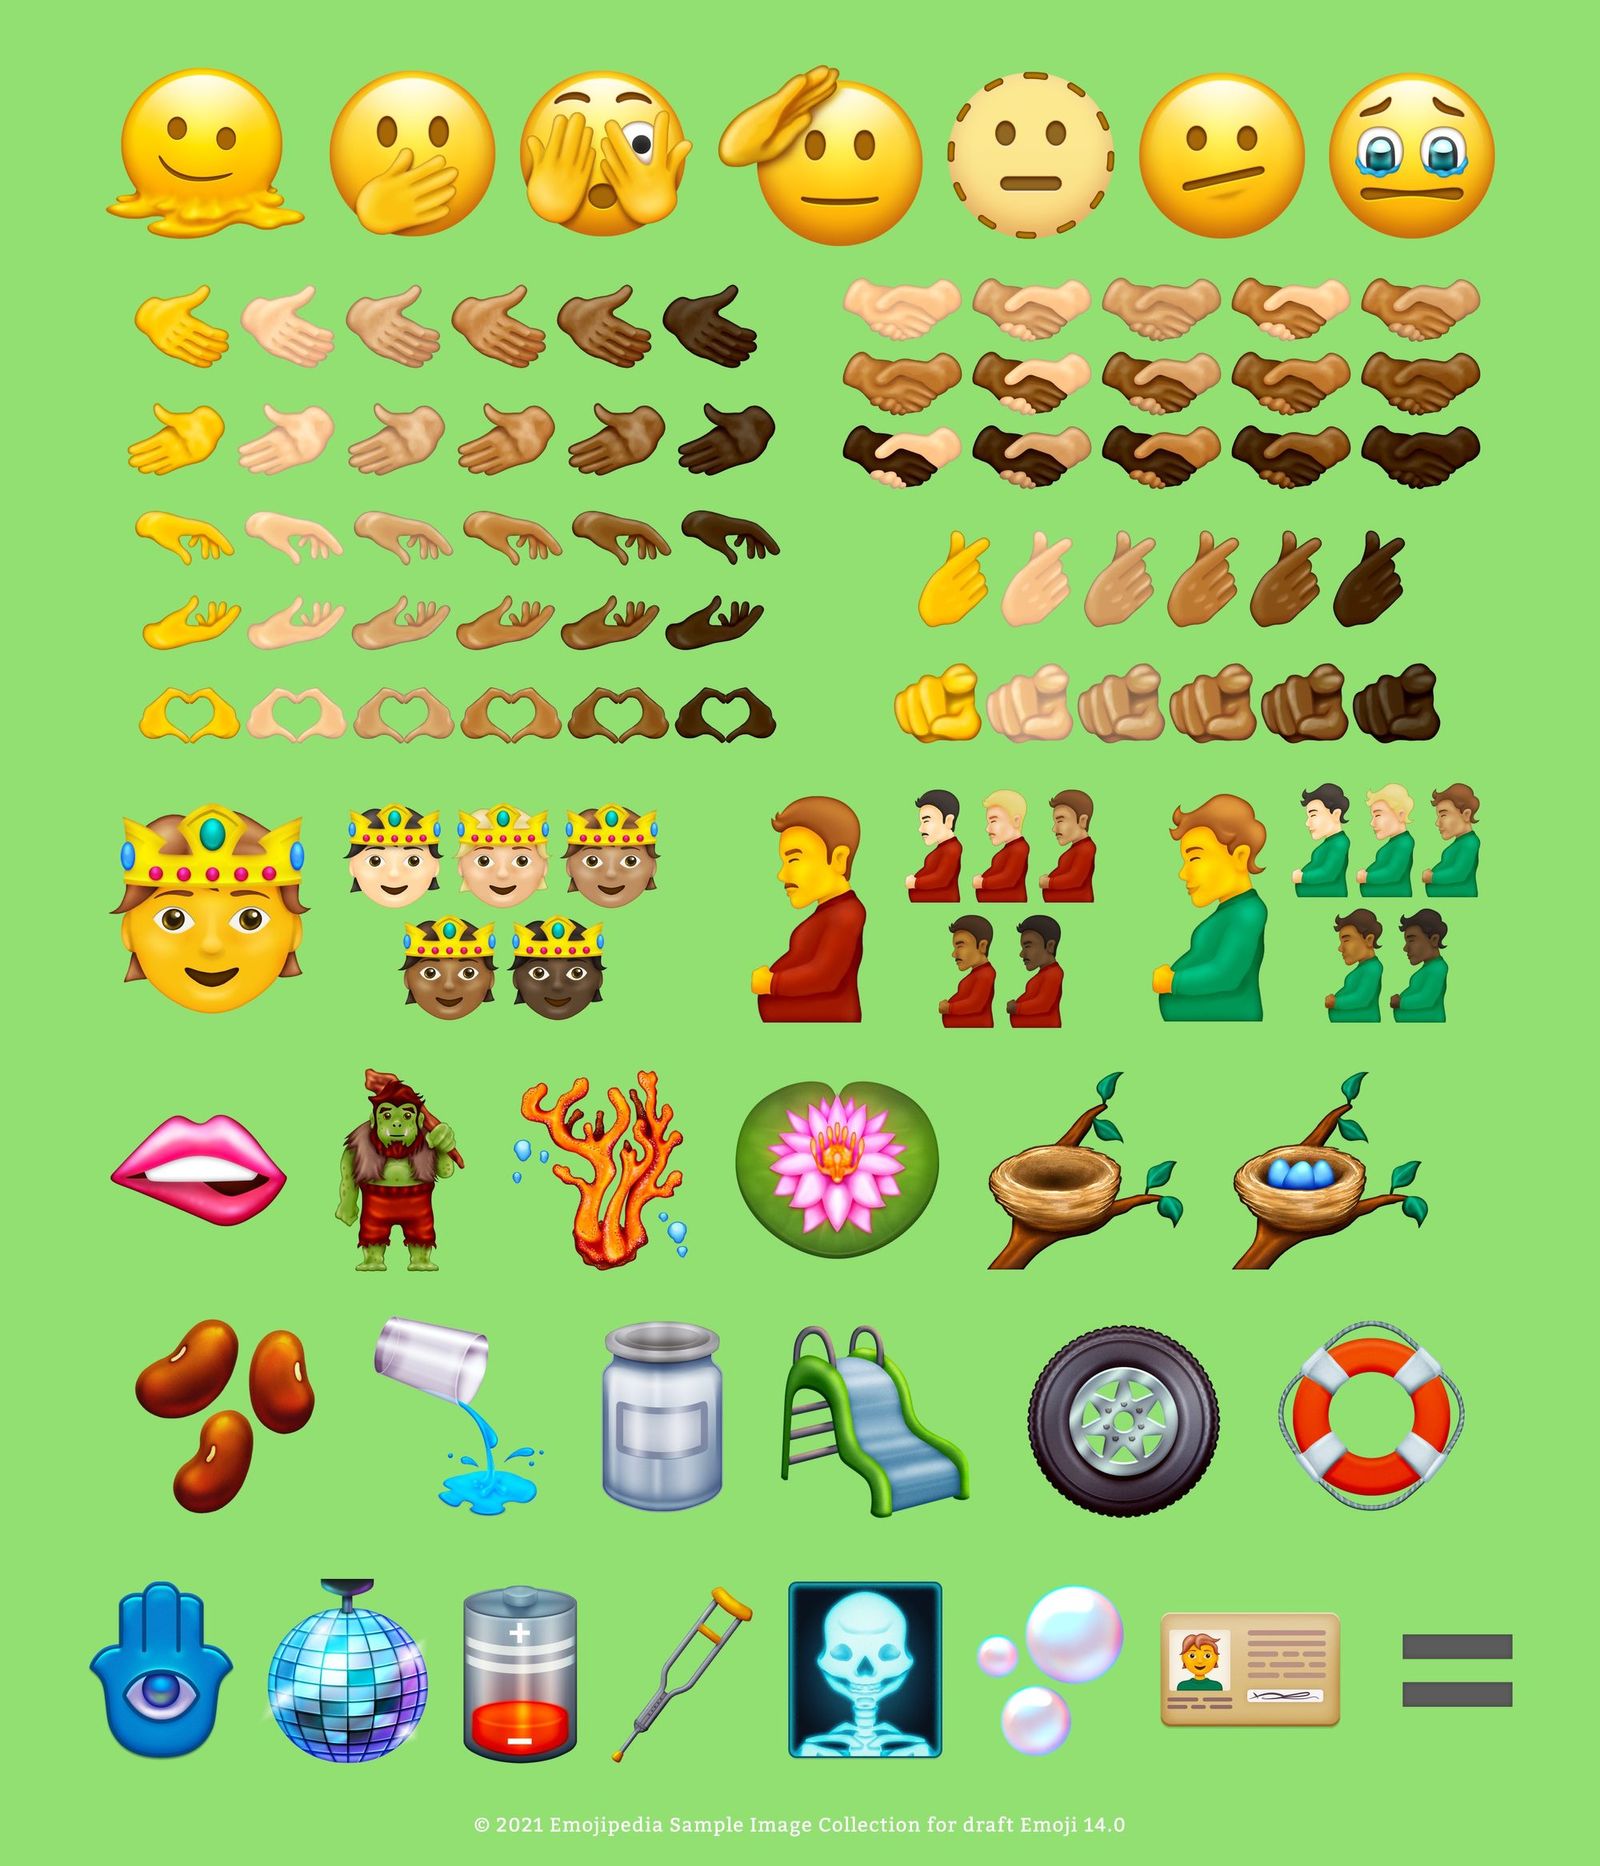 These are some of the new emojis that could come to iPhone this year